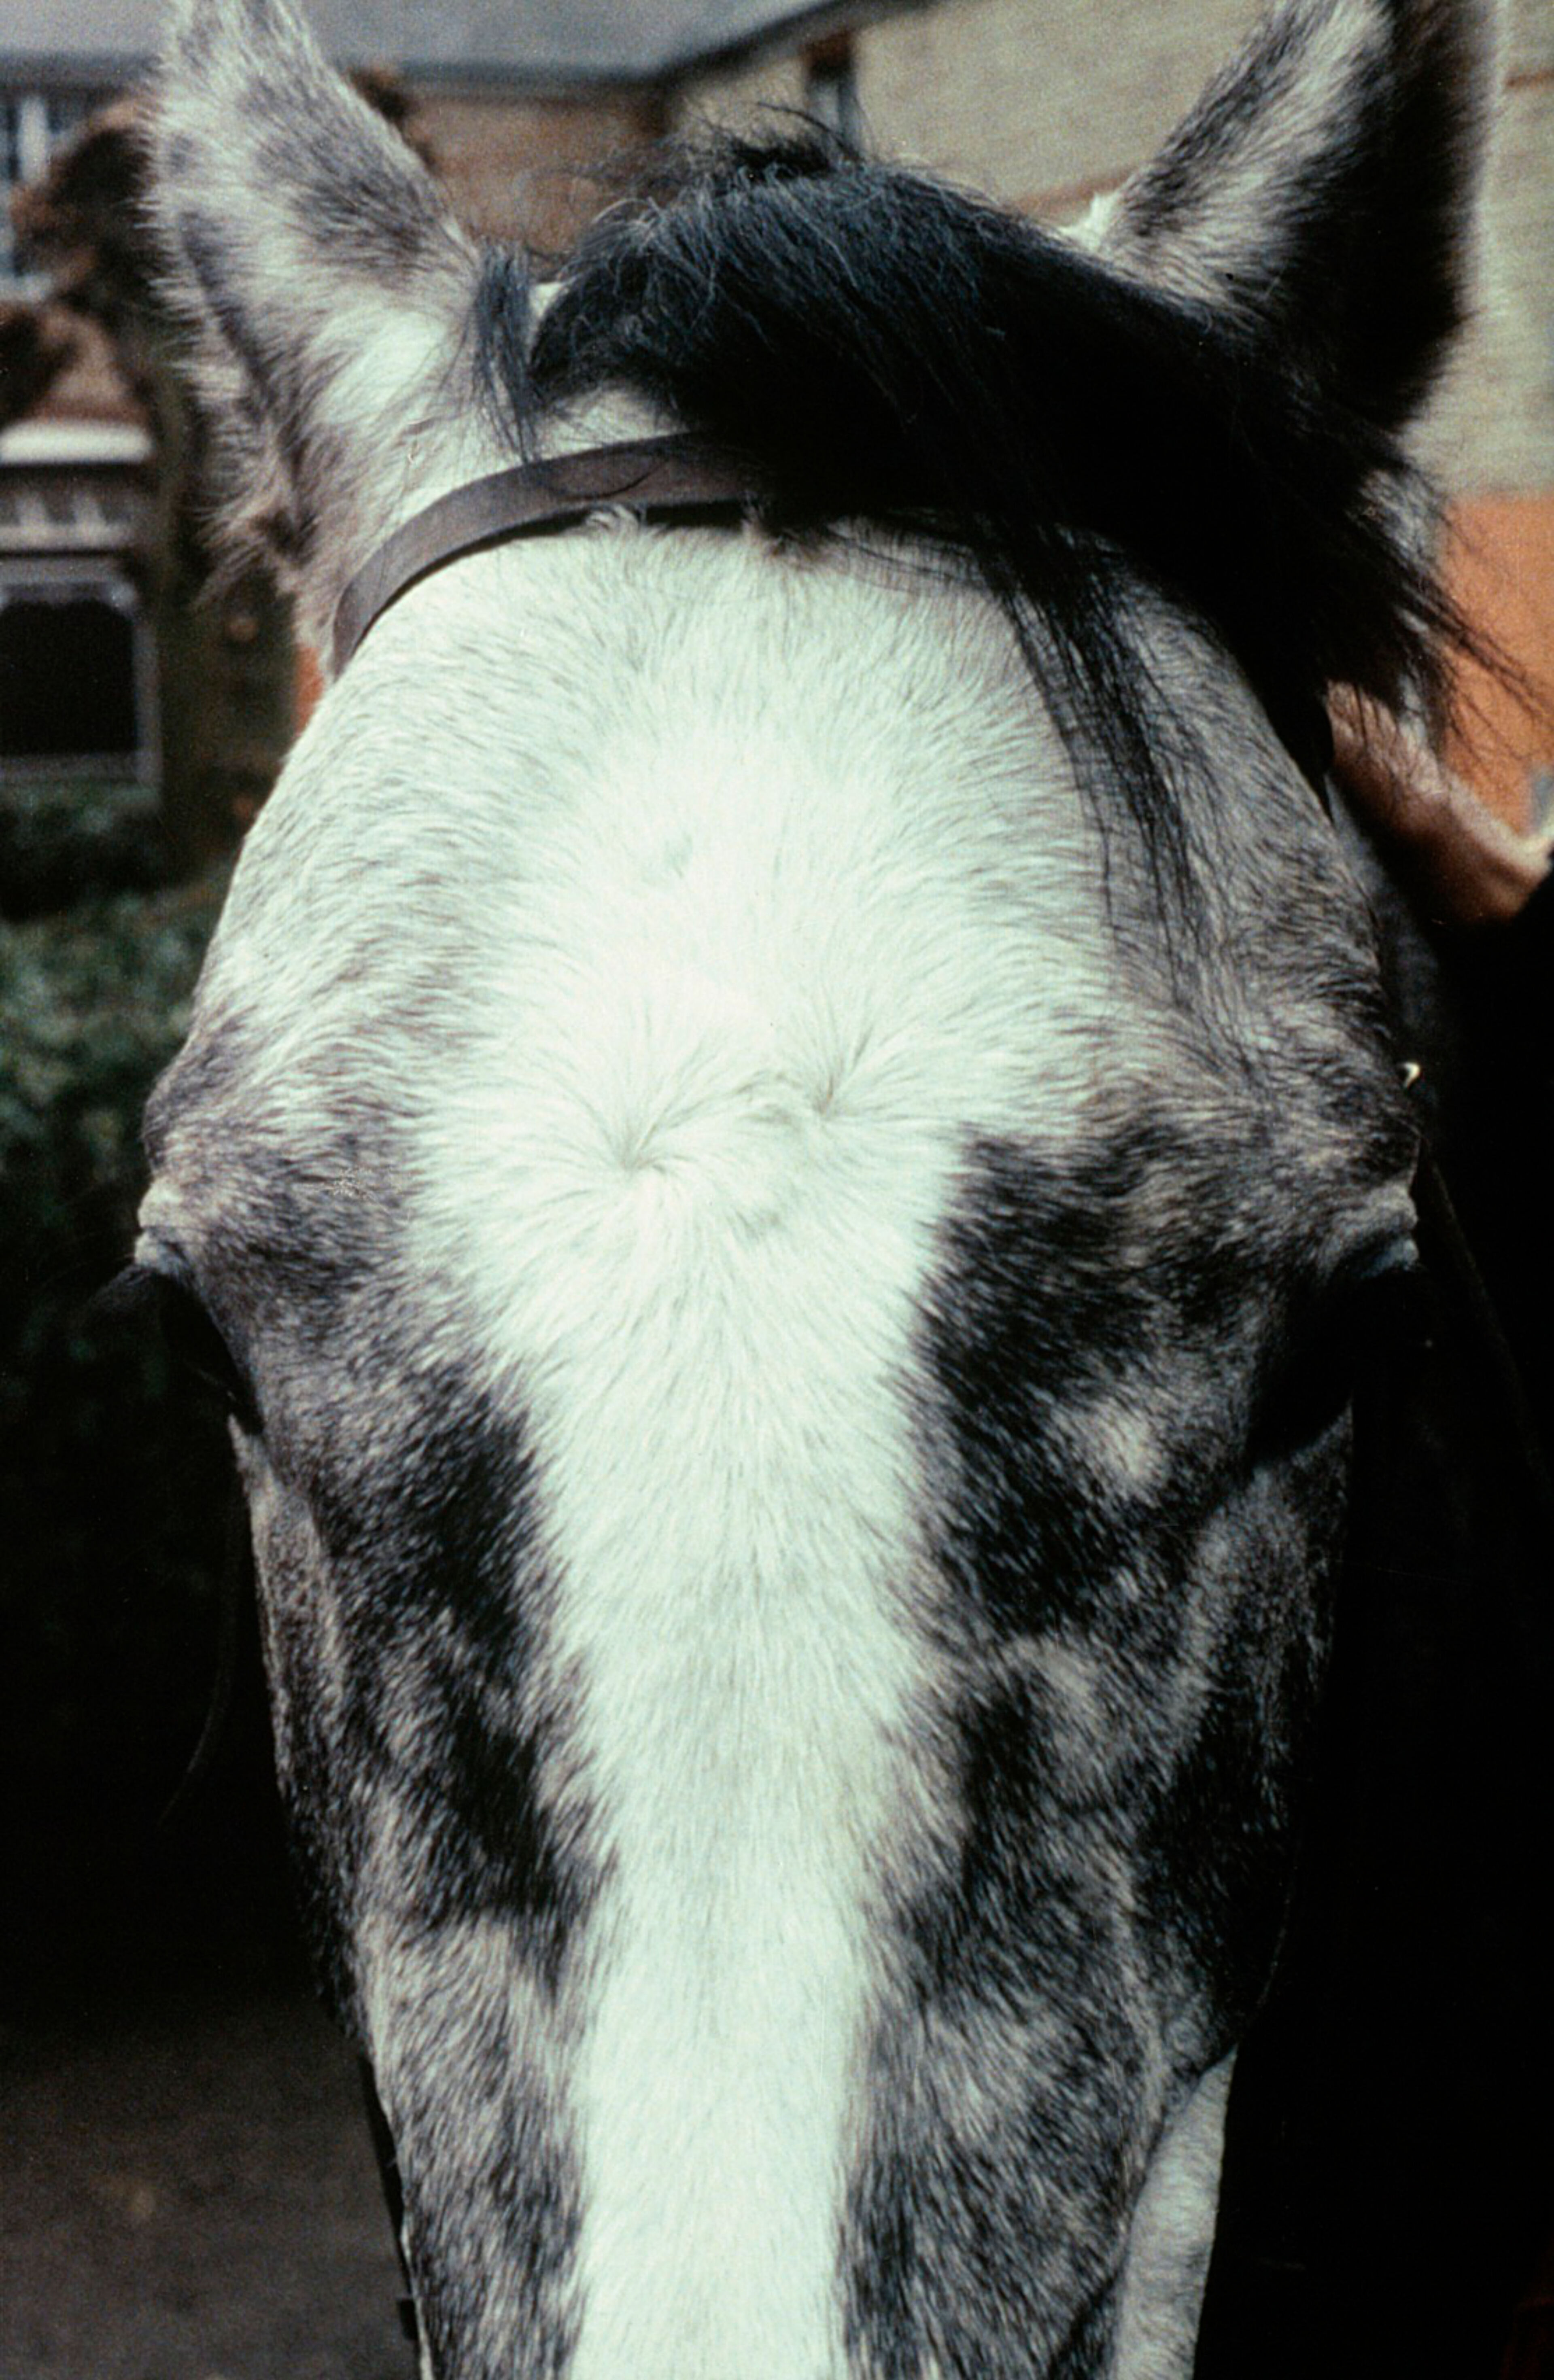 Face of a male Grey horse - whorl and star